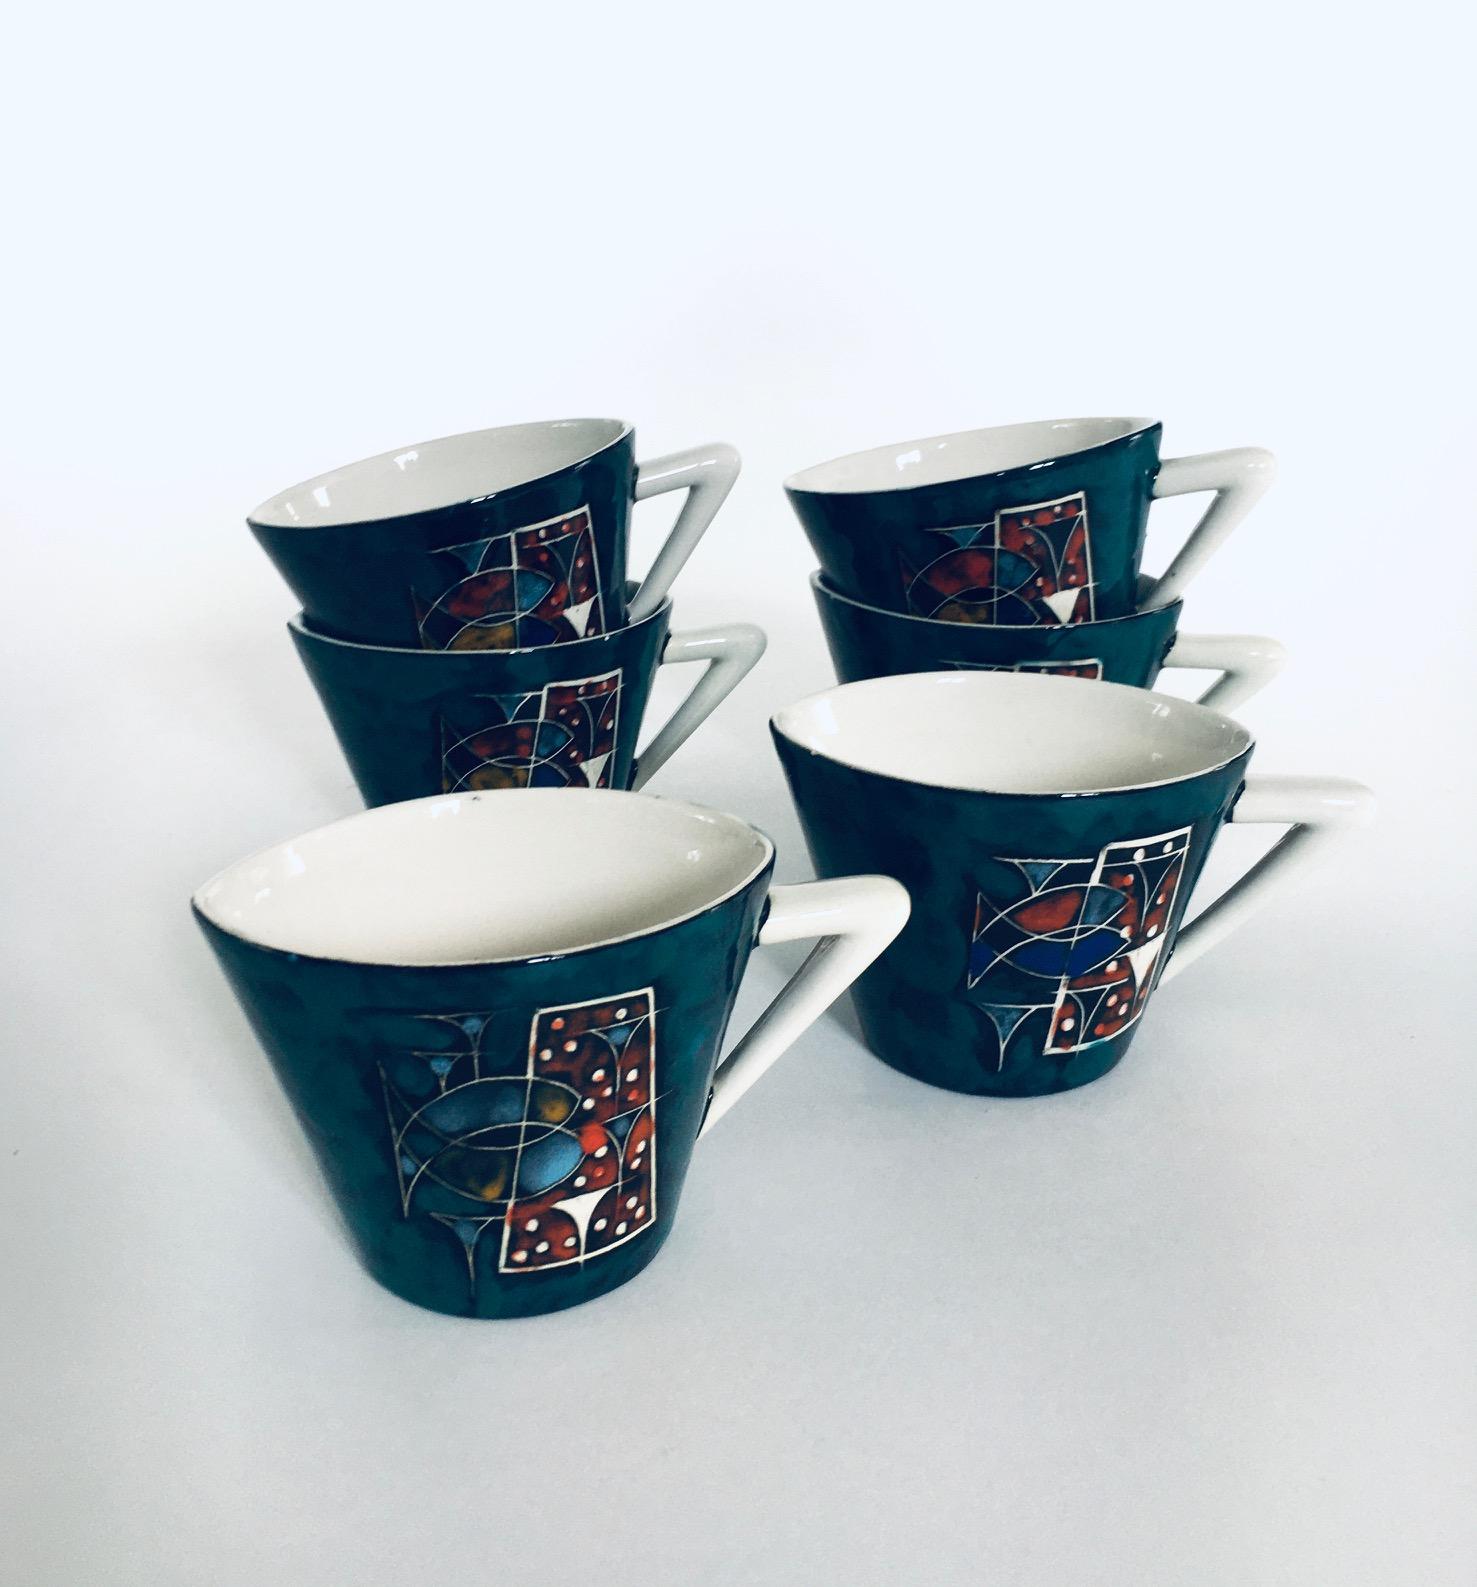 Midcentury Modern Art Ceramic Tea or Coffee Service Set by CEMAS, Italy 1950's For Sale 8